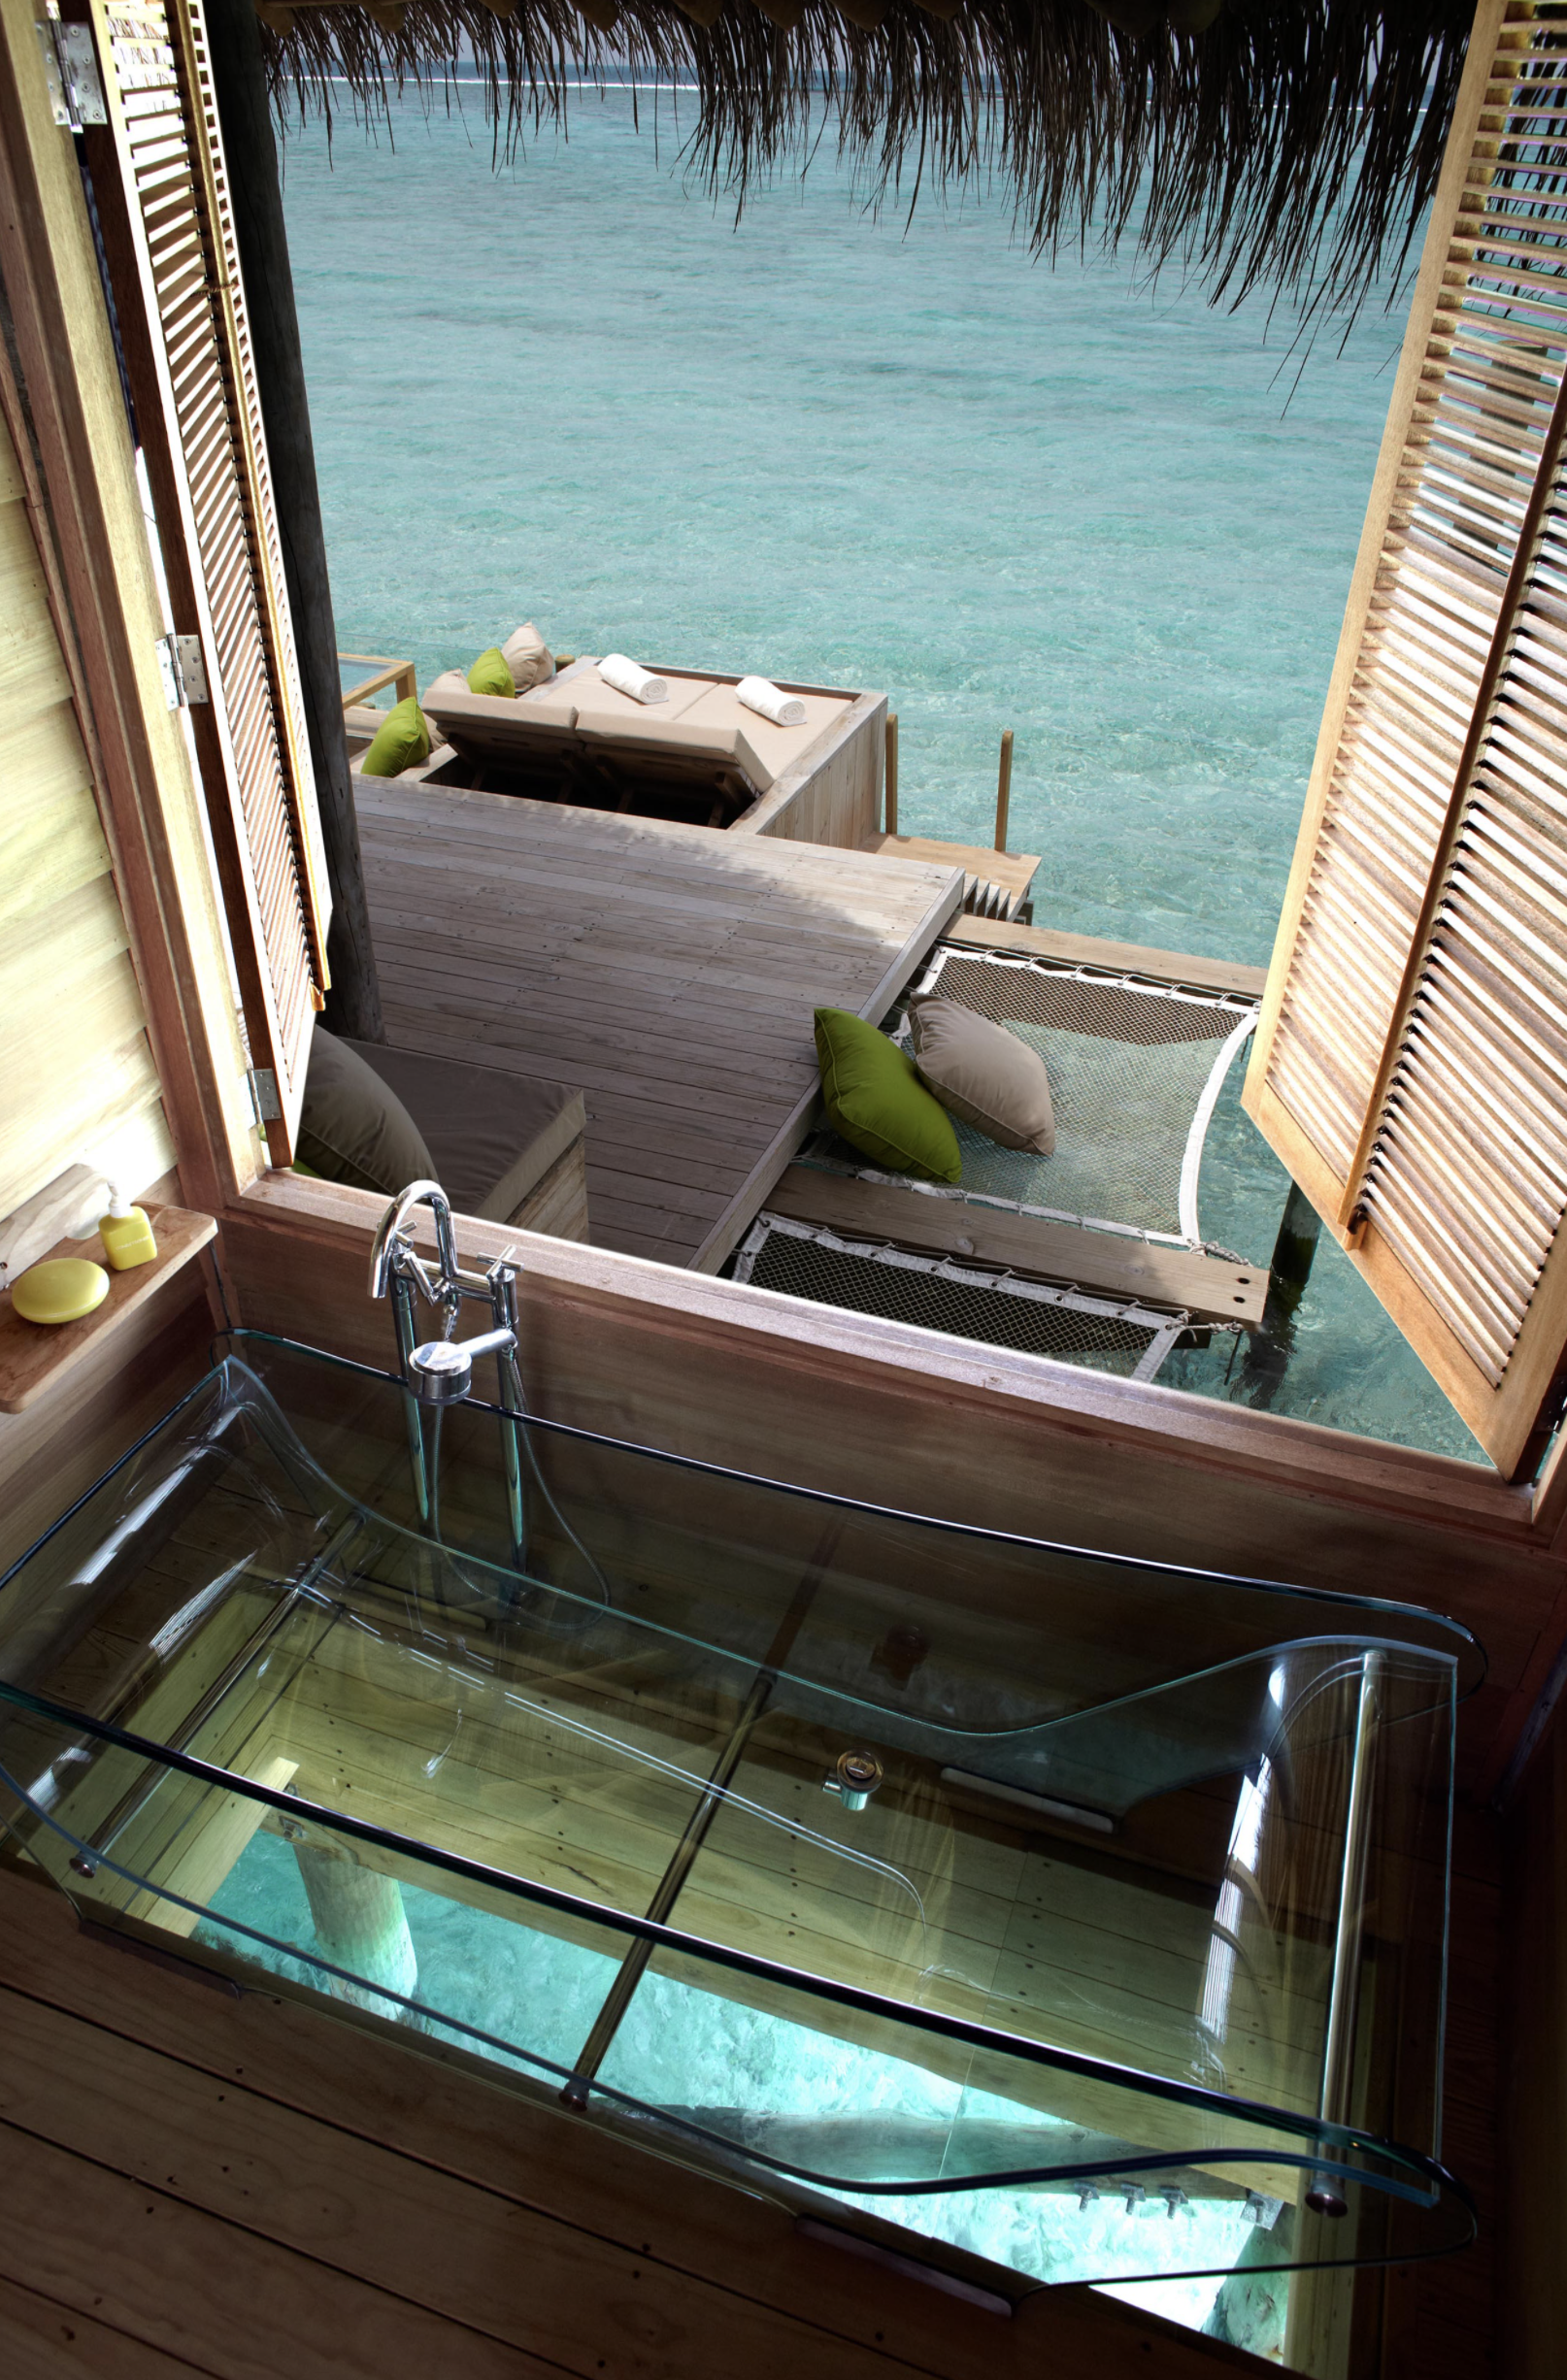 a view from a window of a room with a glass sink and a hammock over water